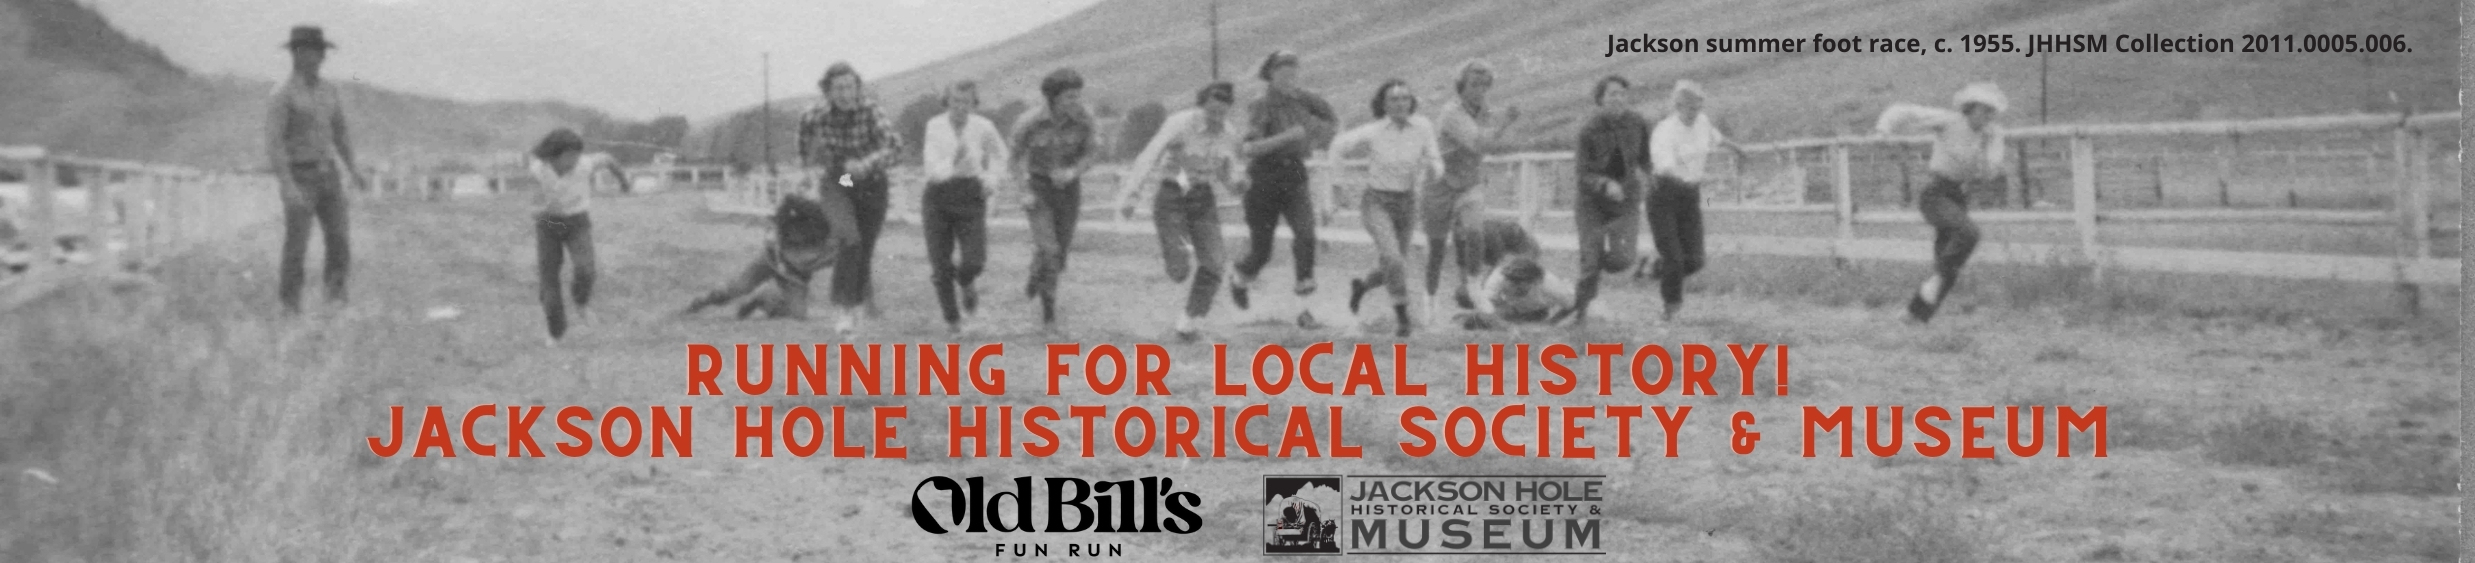 Jackson Hole Historical Society and Museum Email banner (2475 × 563 px)